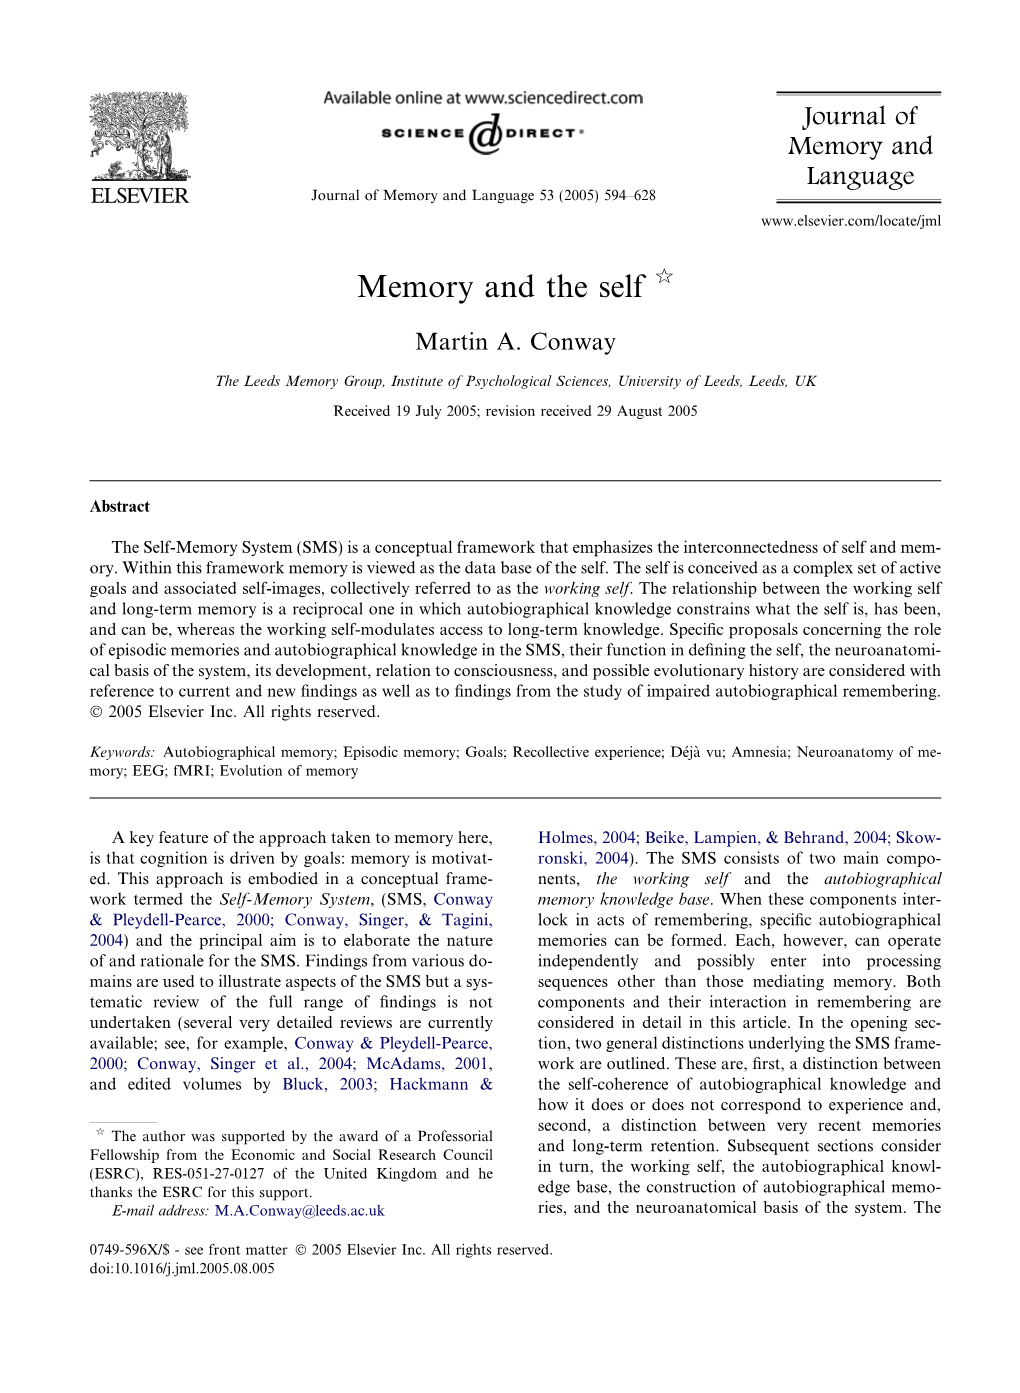 Memory and the Self Q